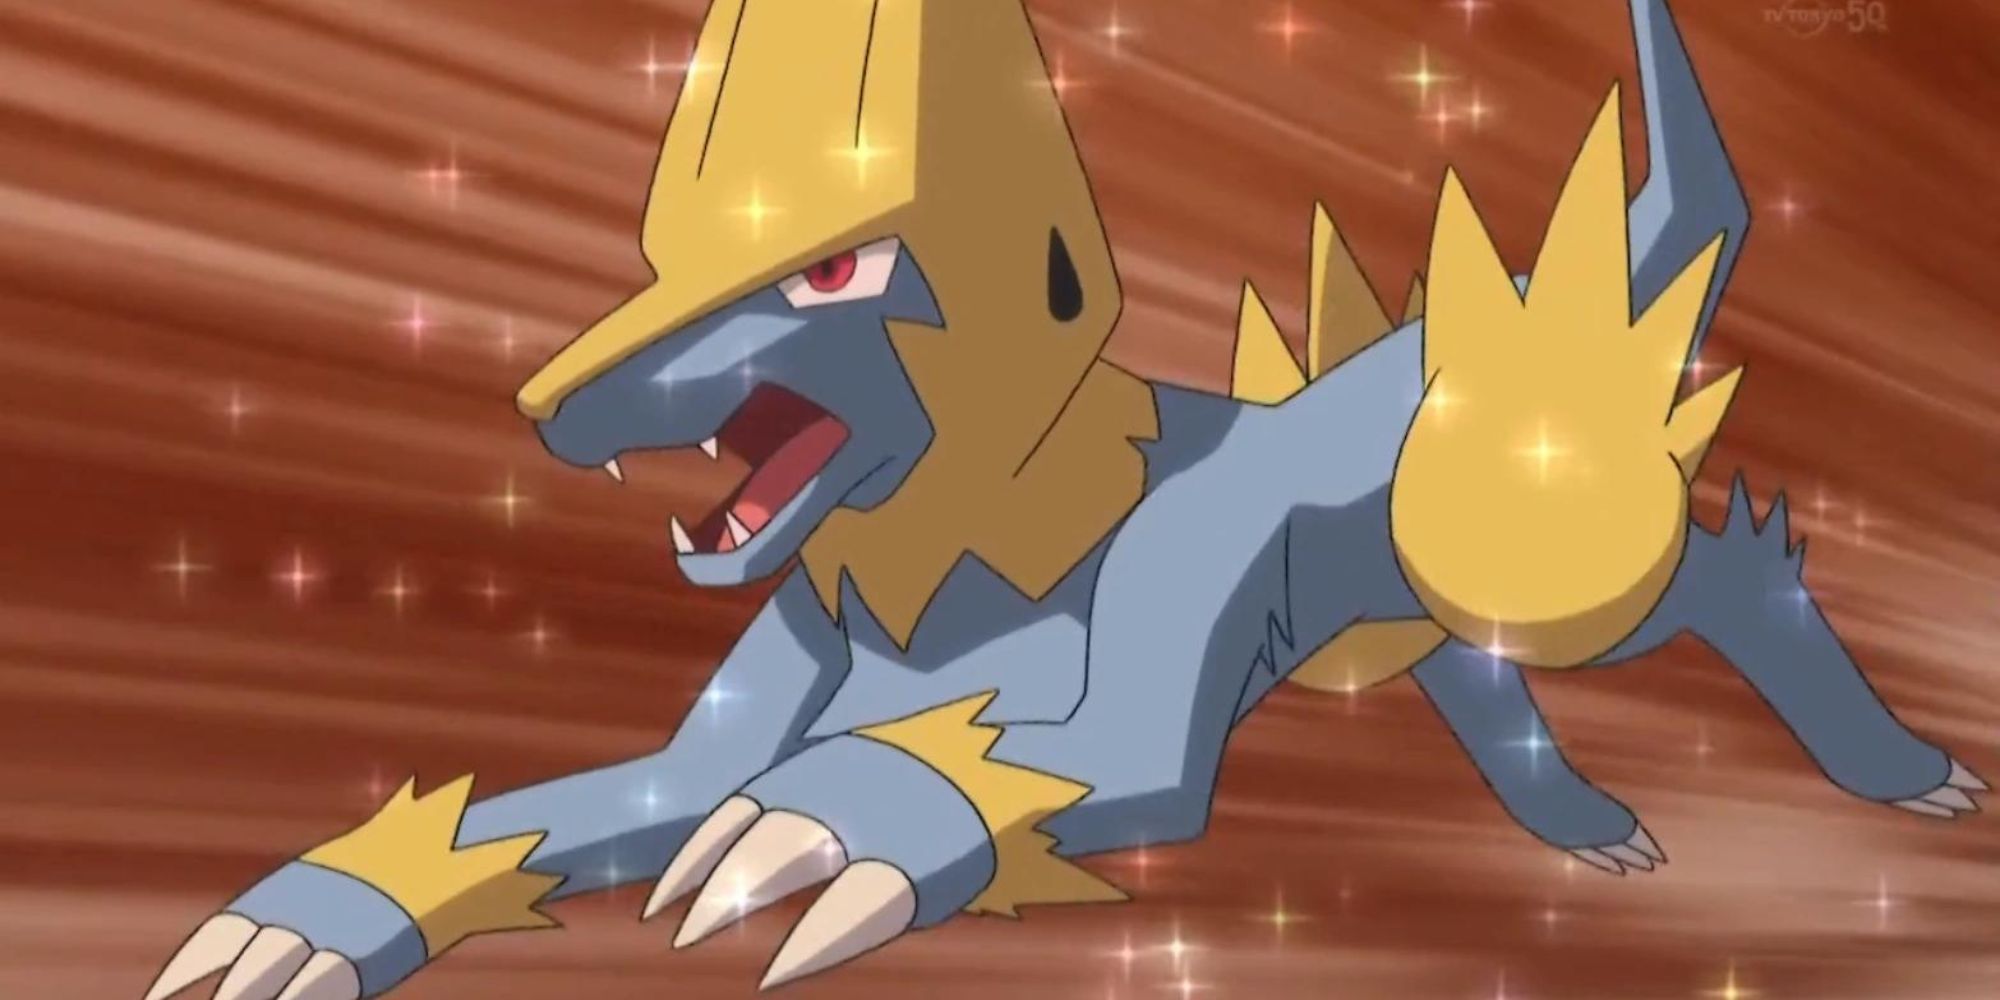 Manectric jumps through the air covered in sparkles